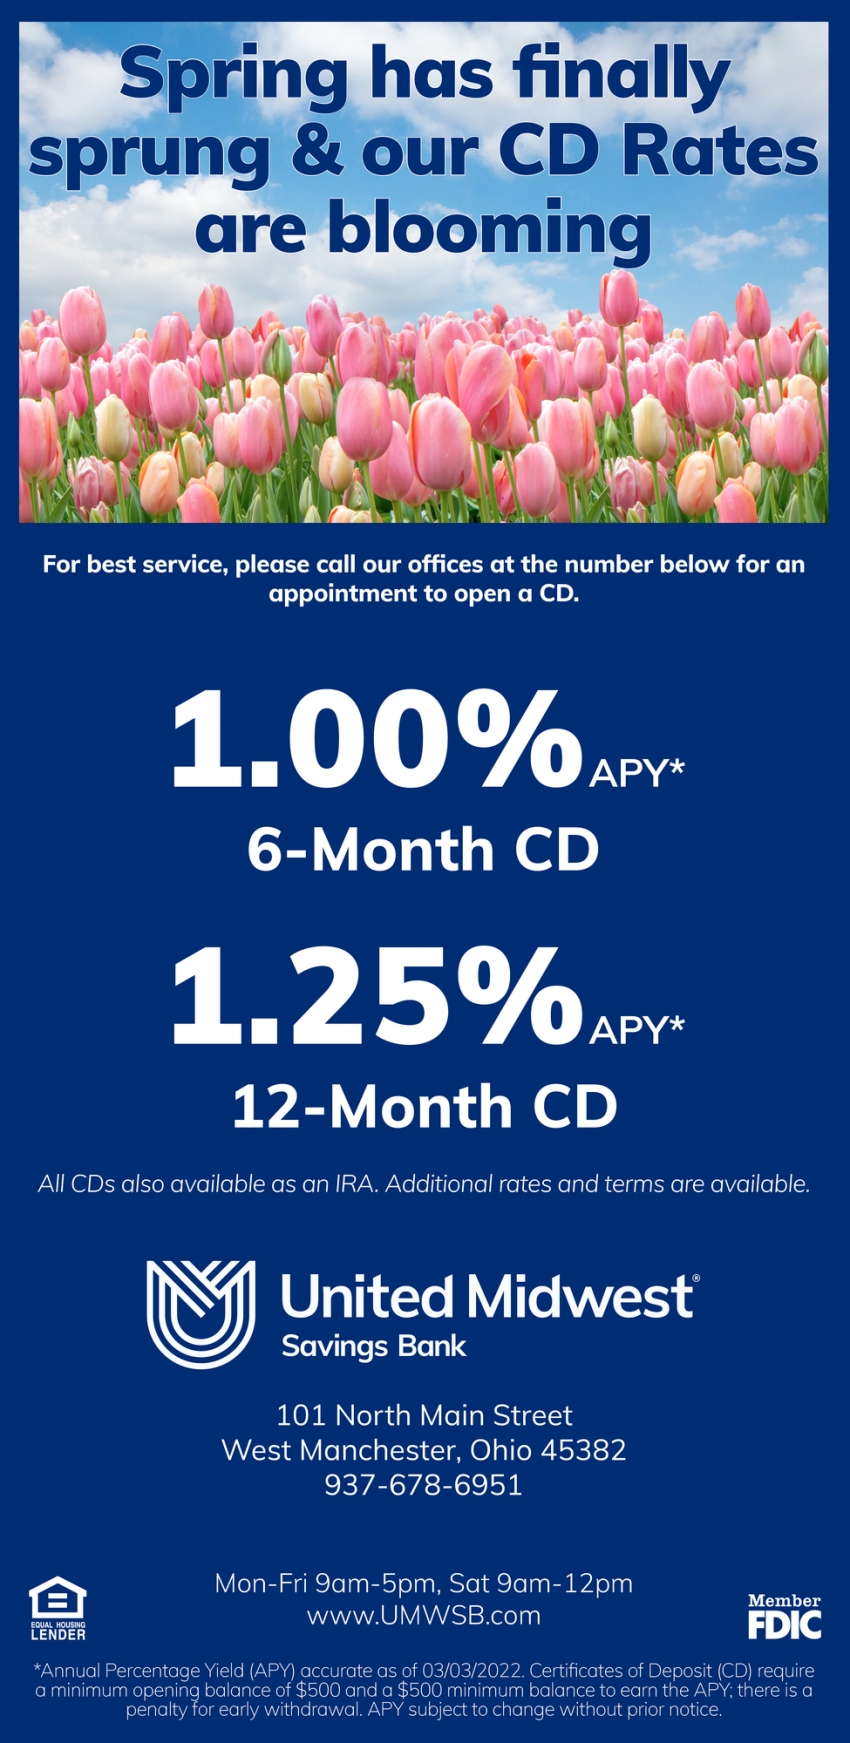 Spring Has Finally Sprung & Our CD Rates Are Blooming